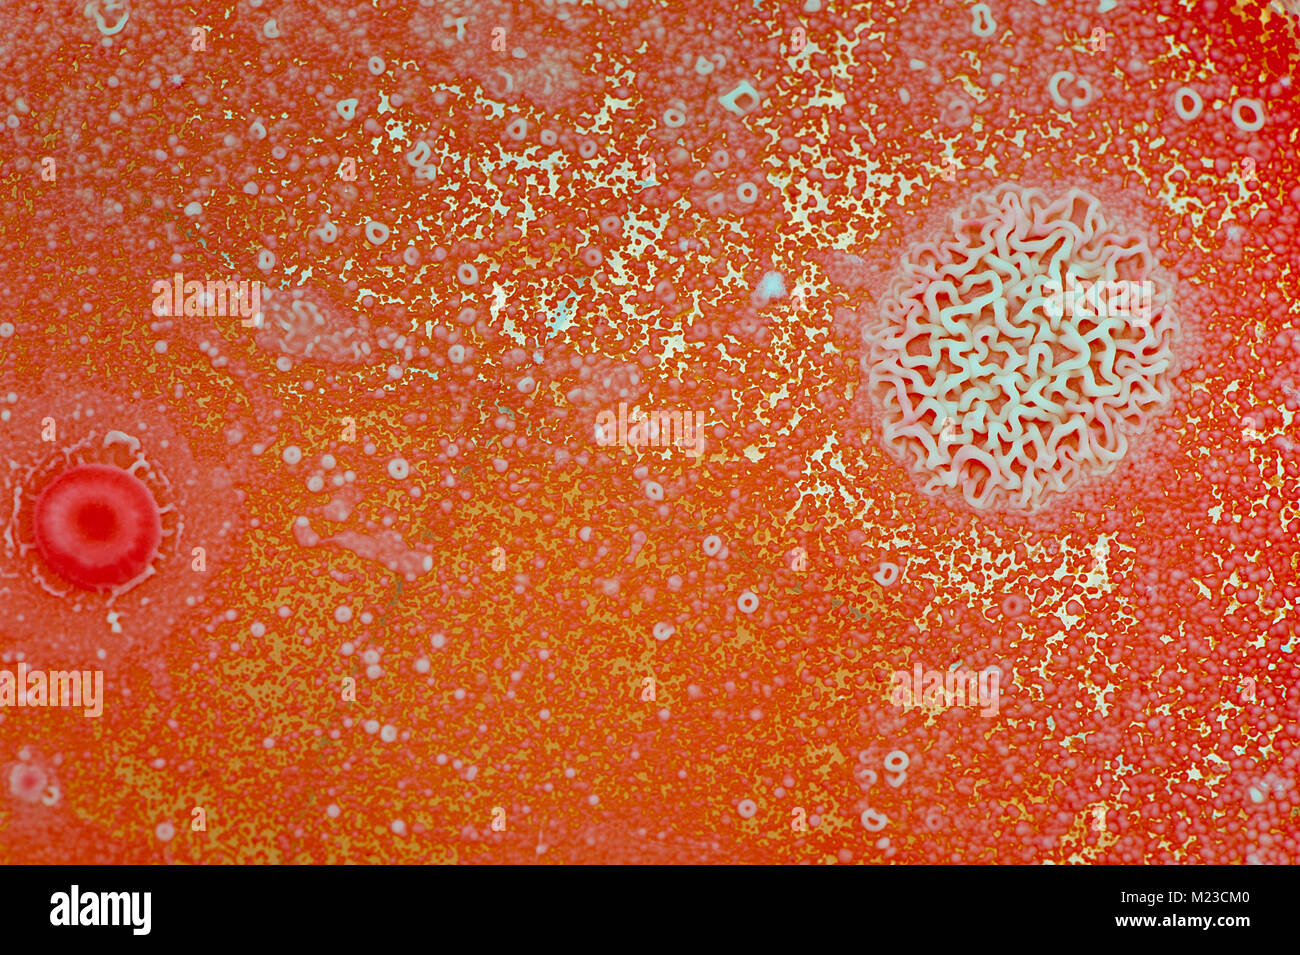 A microbiological background made of yeasts and bacterial colonies/cultures in a growth medium. Stock Photo